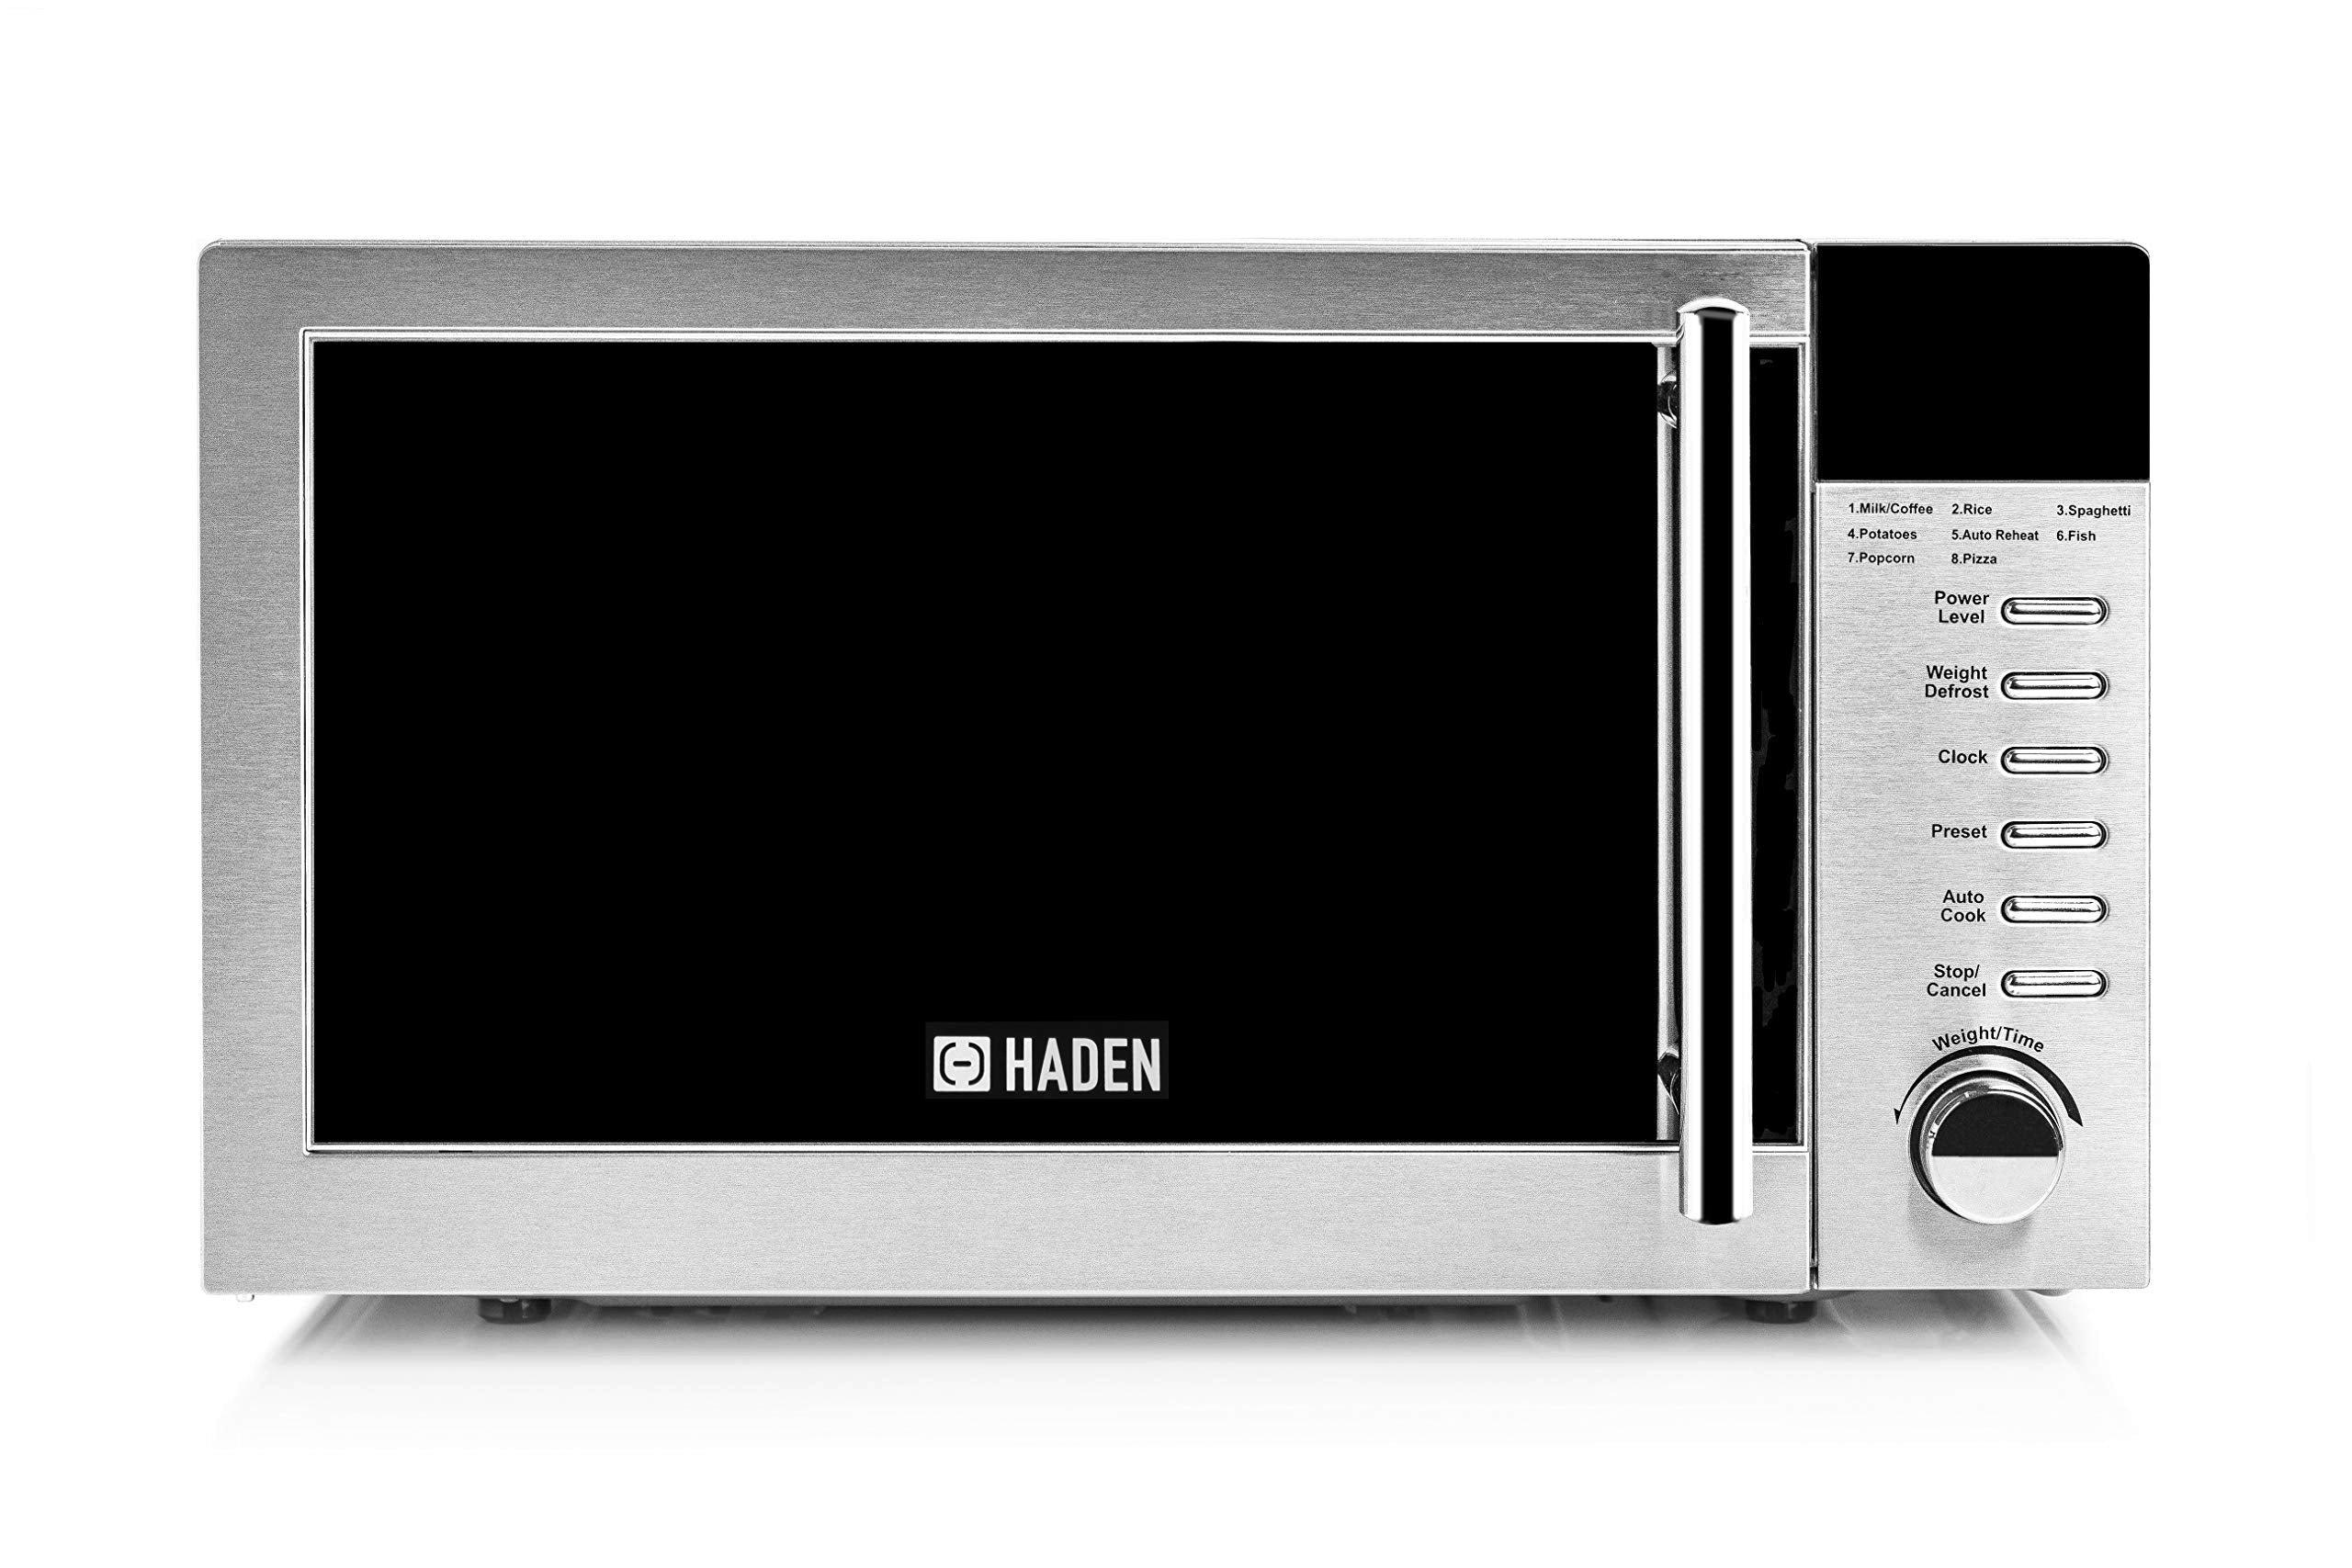 'Haden' Stainless Steel Microwave Defrost, Reheat & Cooking Functions